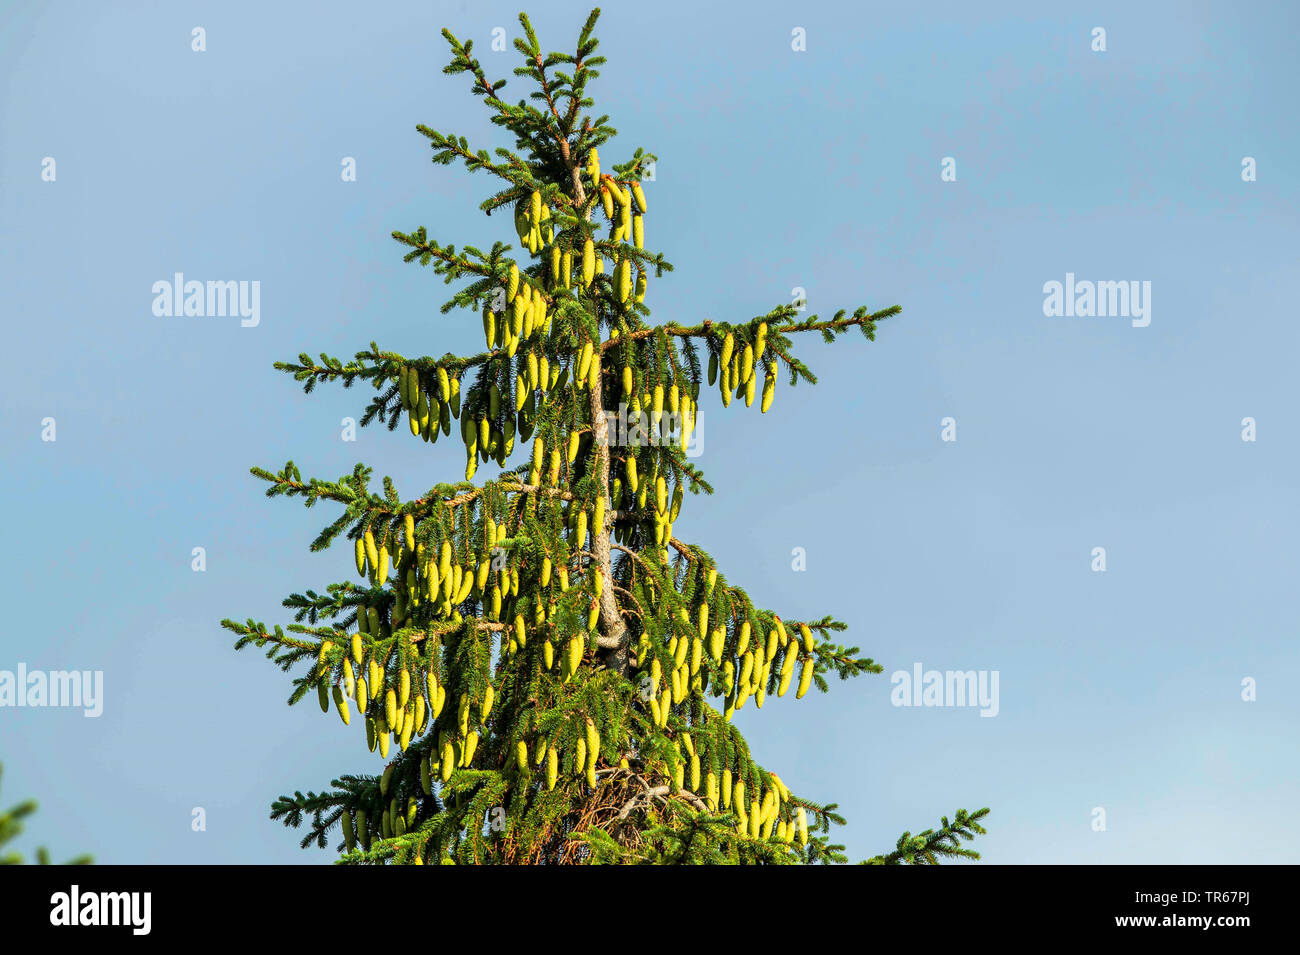 Norway spruce (Picea abies), crown with immature cones, Germany, Mecklenburg-Western Pomerania Stock Photo